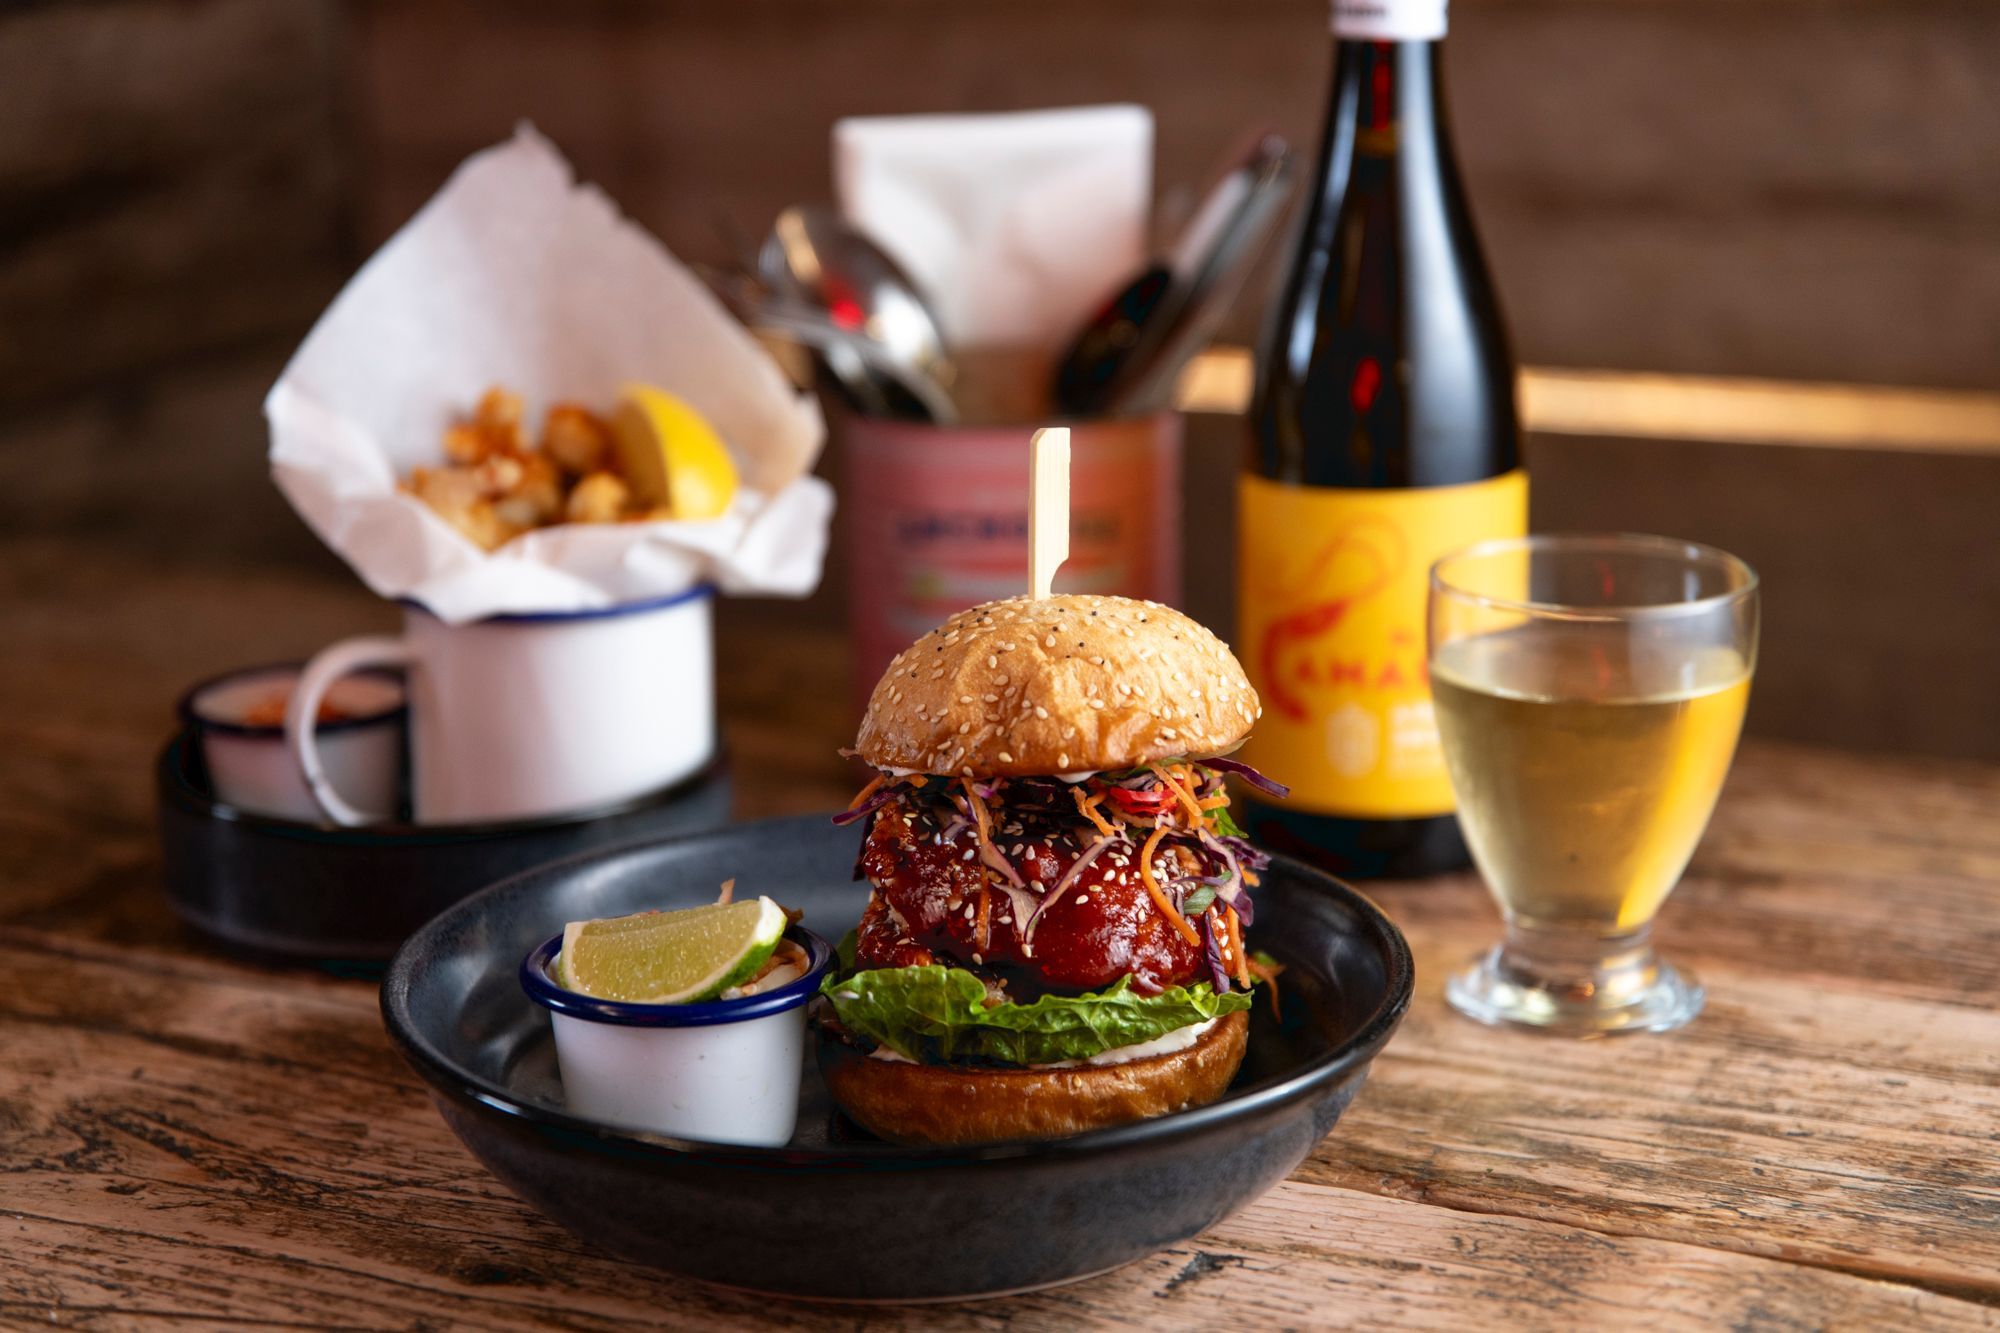 Crabshack burger served in dark plate and with glass of white wine